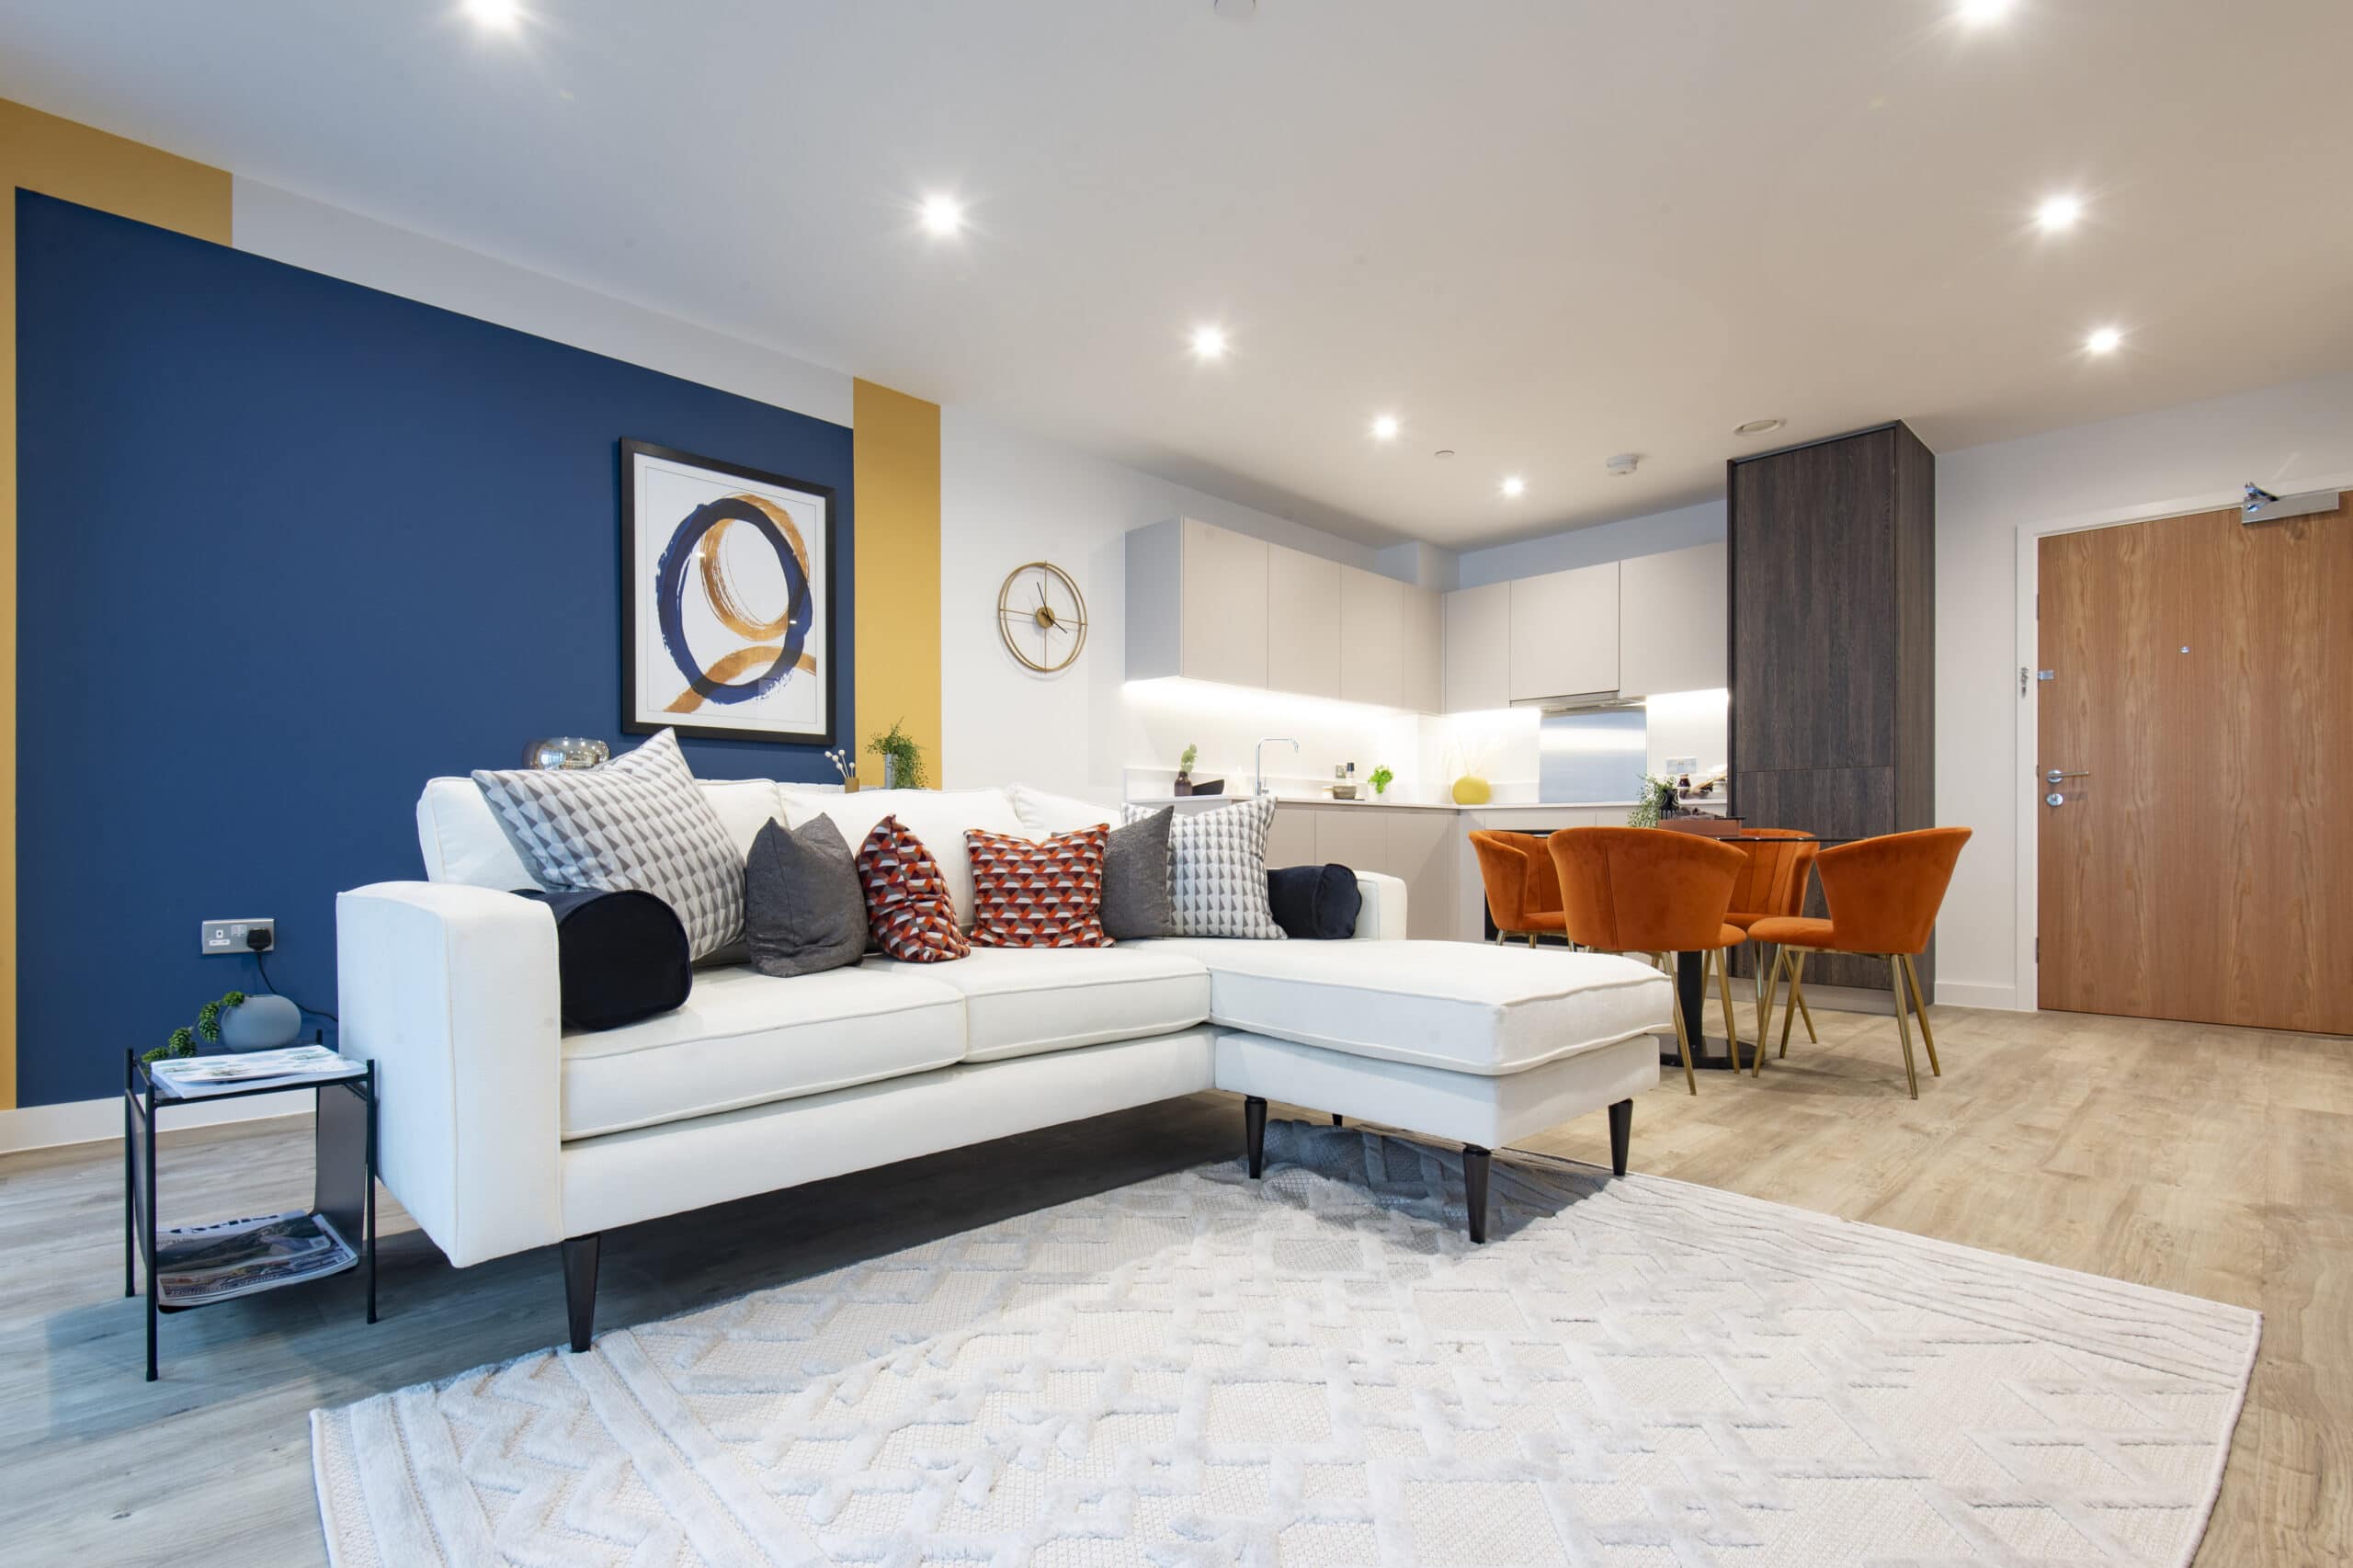 Interior photography of L&Q at Kidbrooke Village - Shared Ownership homes available on Share to Buy